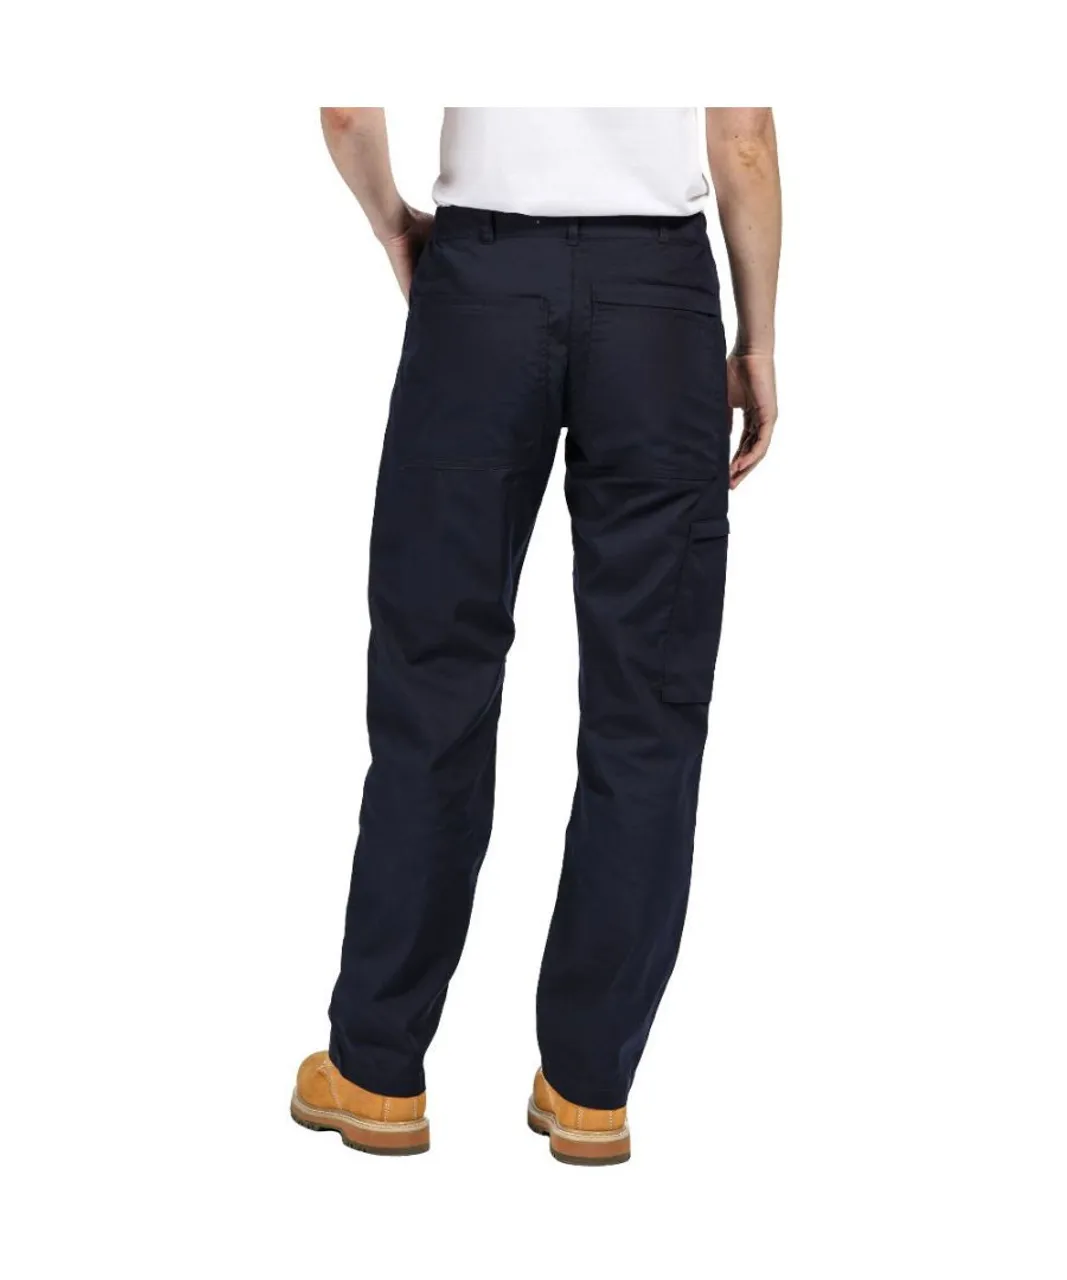 Regatta Womens Action Water Repellent Walking Trousers - Navy